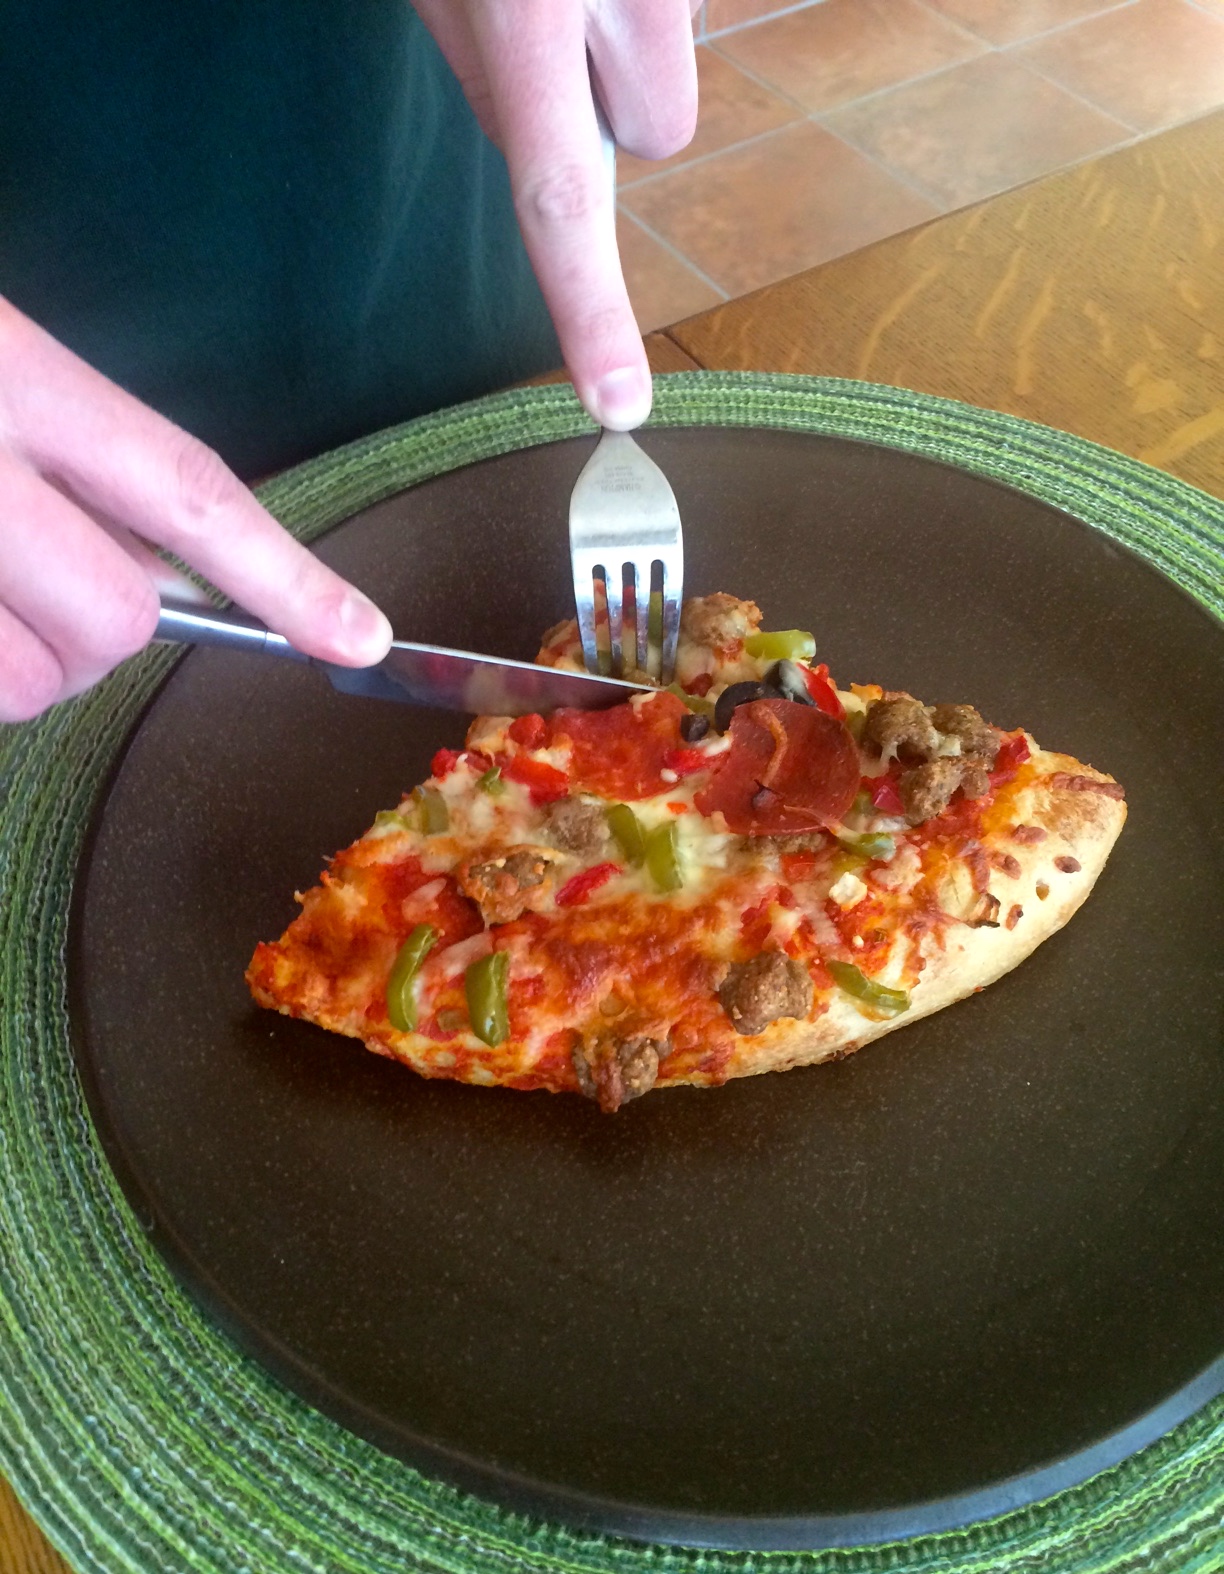 Eating Pizza with a Knife and Fork